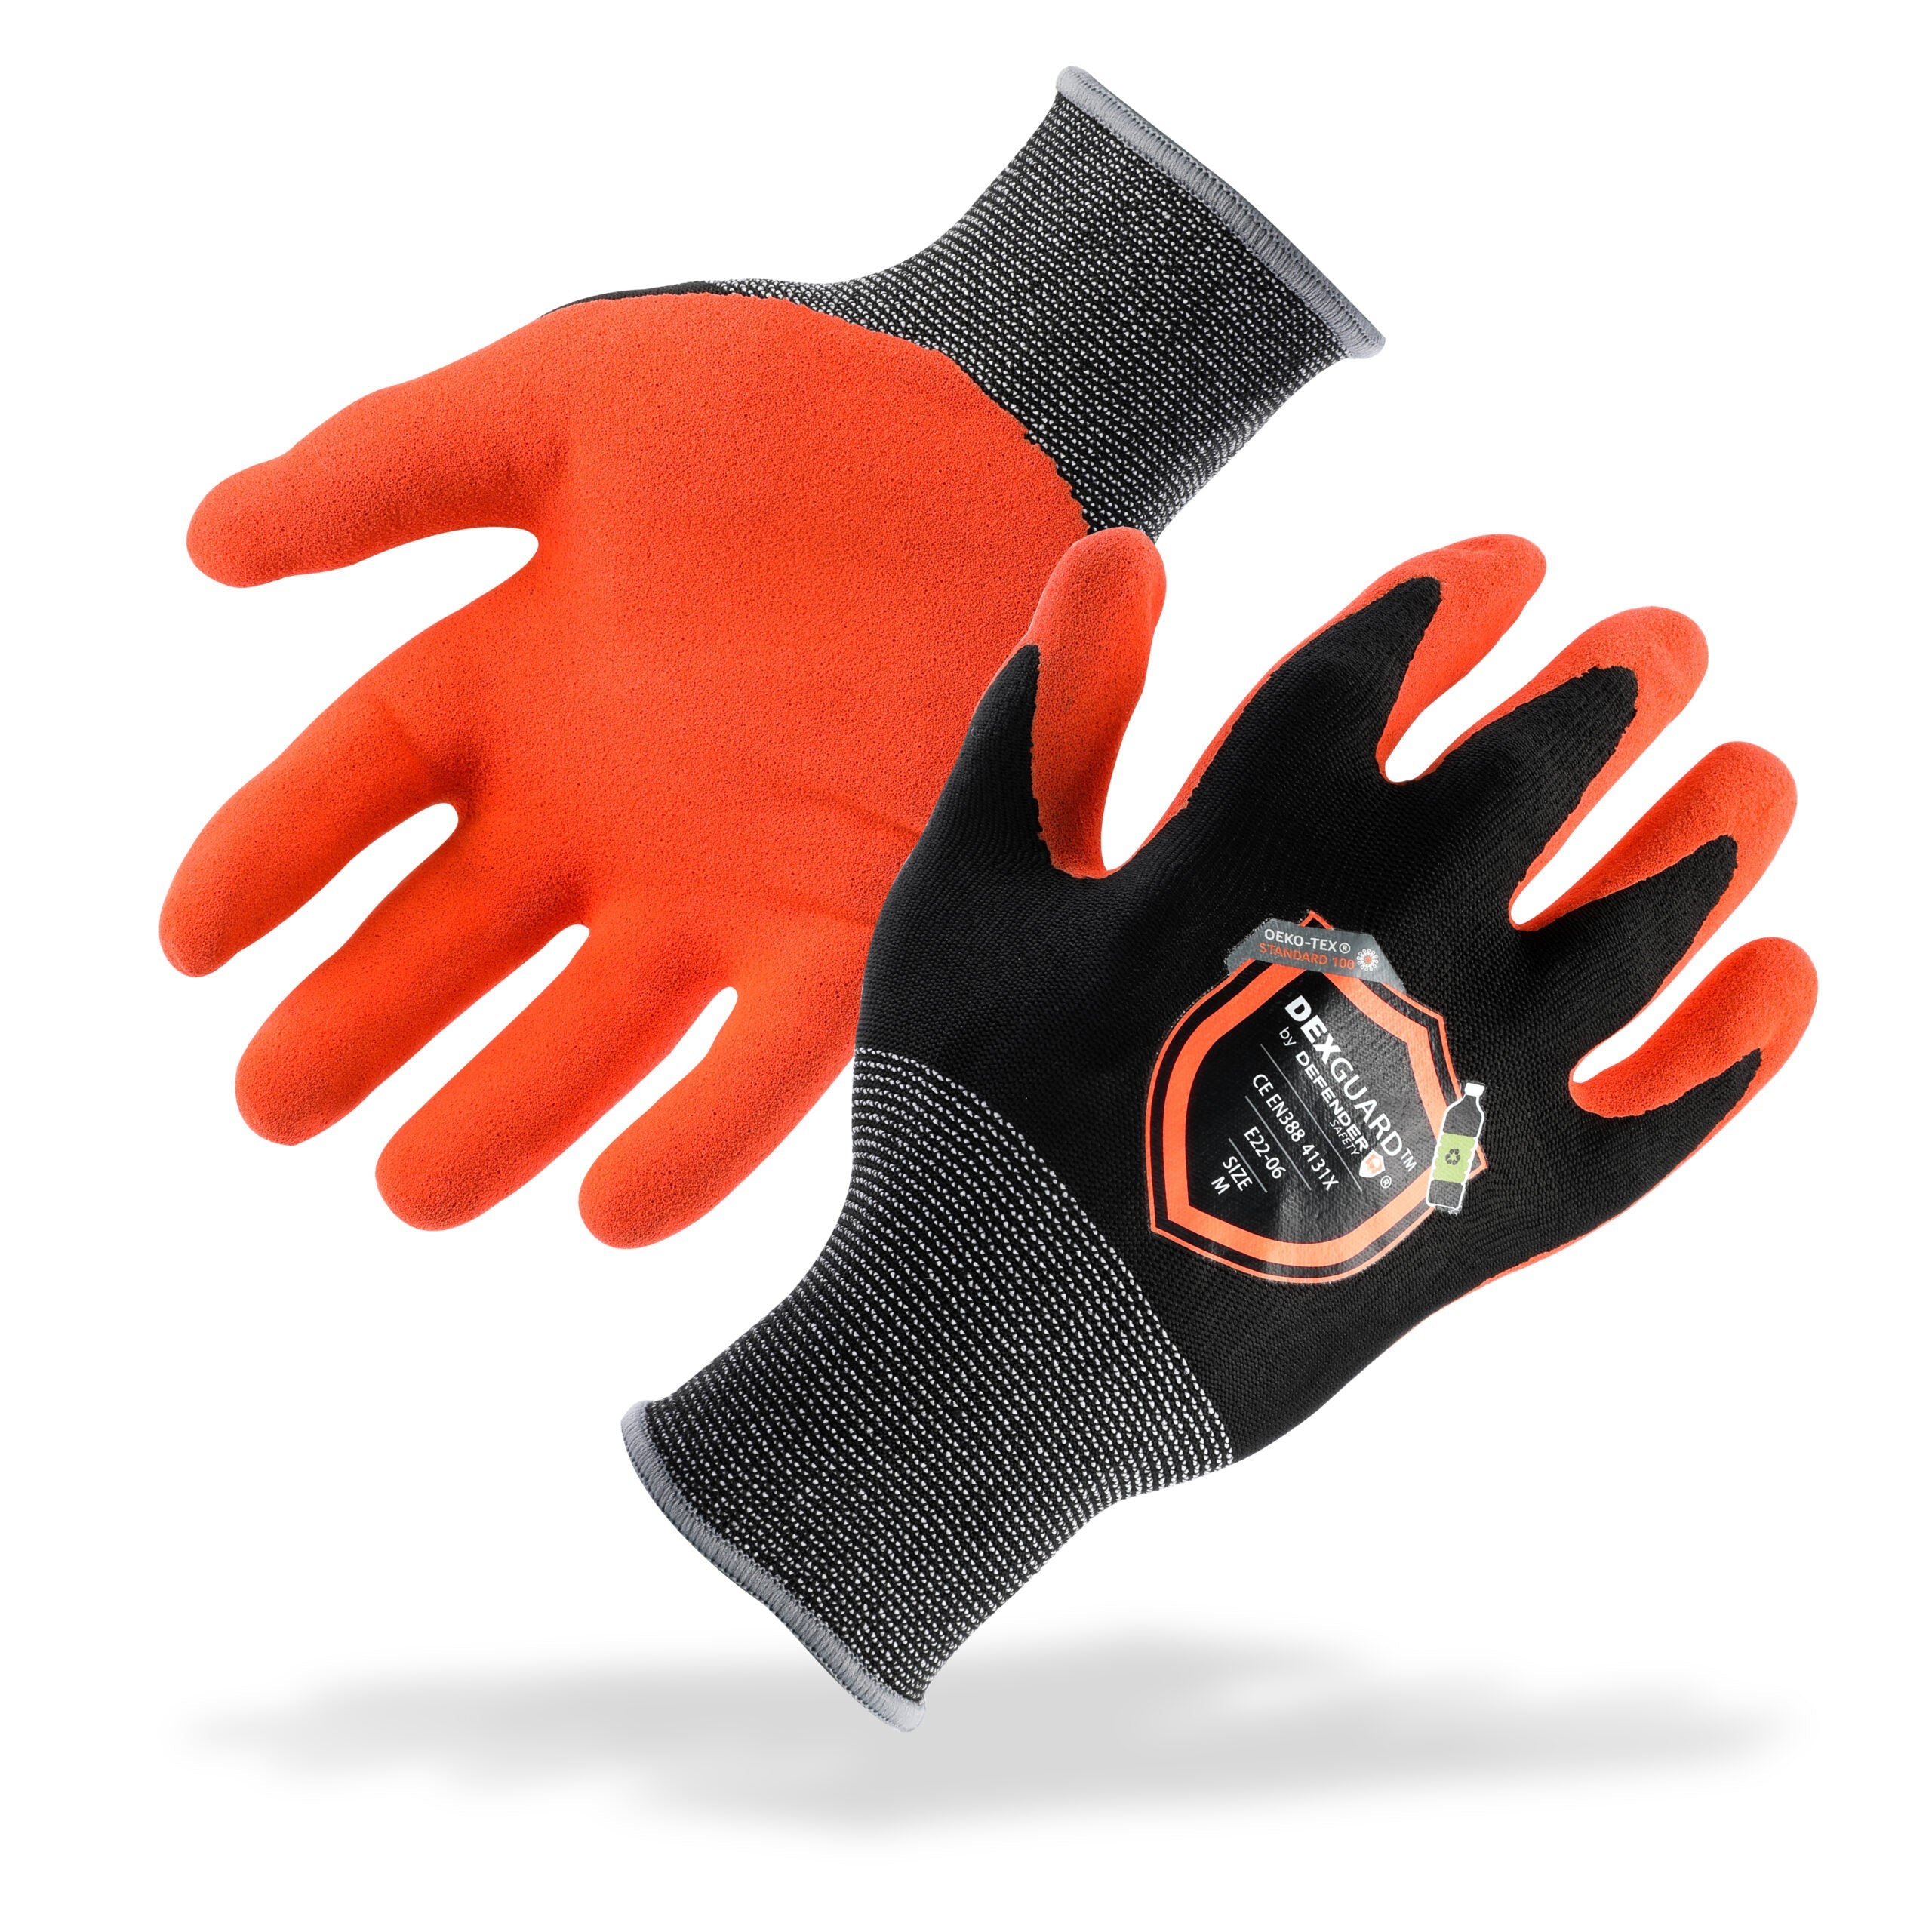 https://cdn.shopify.com/s/files/1/0786/4523/1934/products/dexguard-general-purpose-recycled-gloves-touch-screen-compatible-abrasion-resistant-level-4-textured-nitrile-coating-471317.jpg?v=1690825176&width=2560